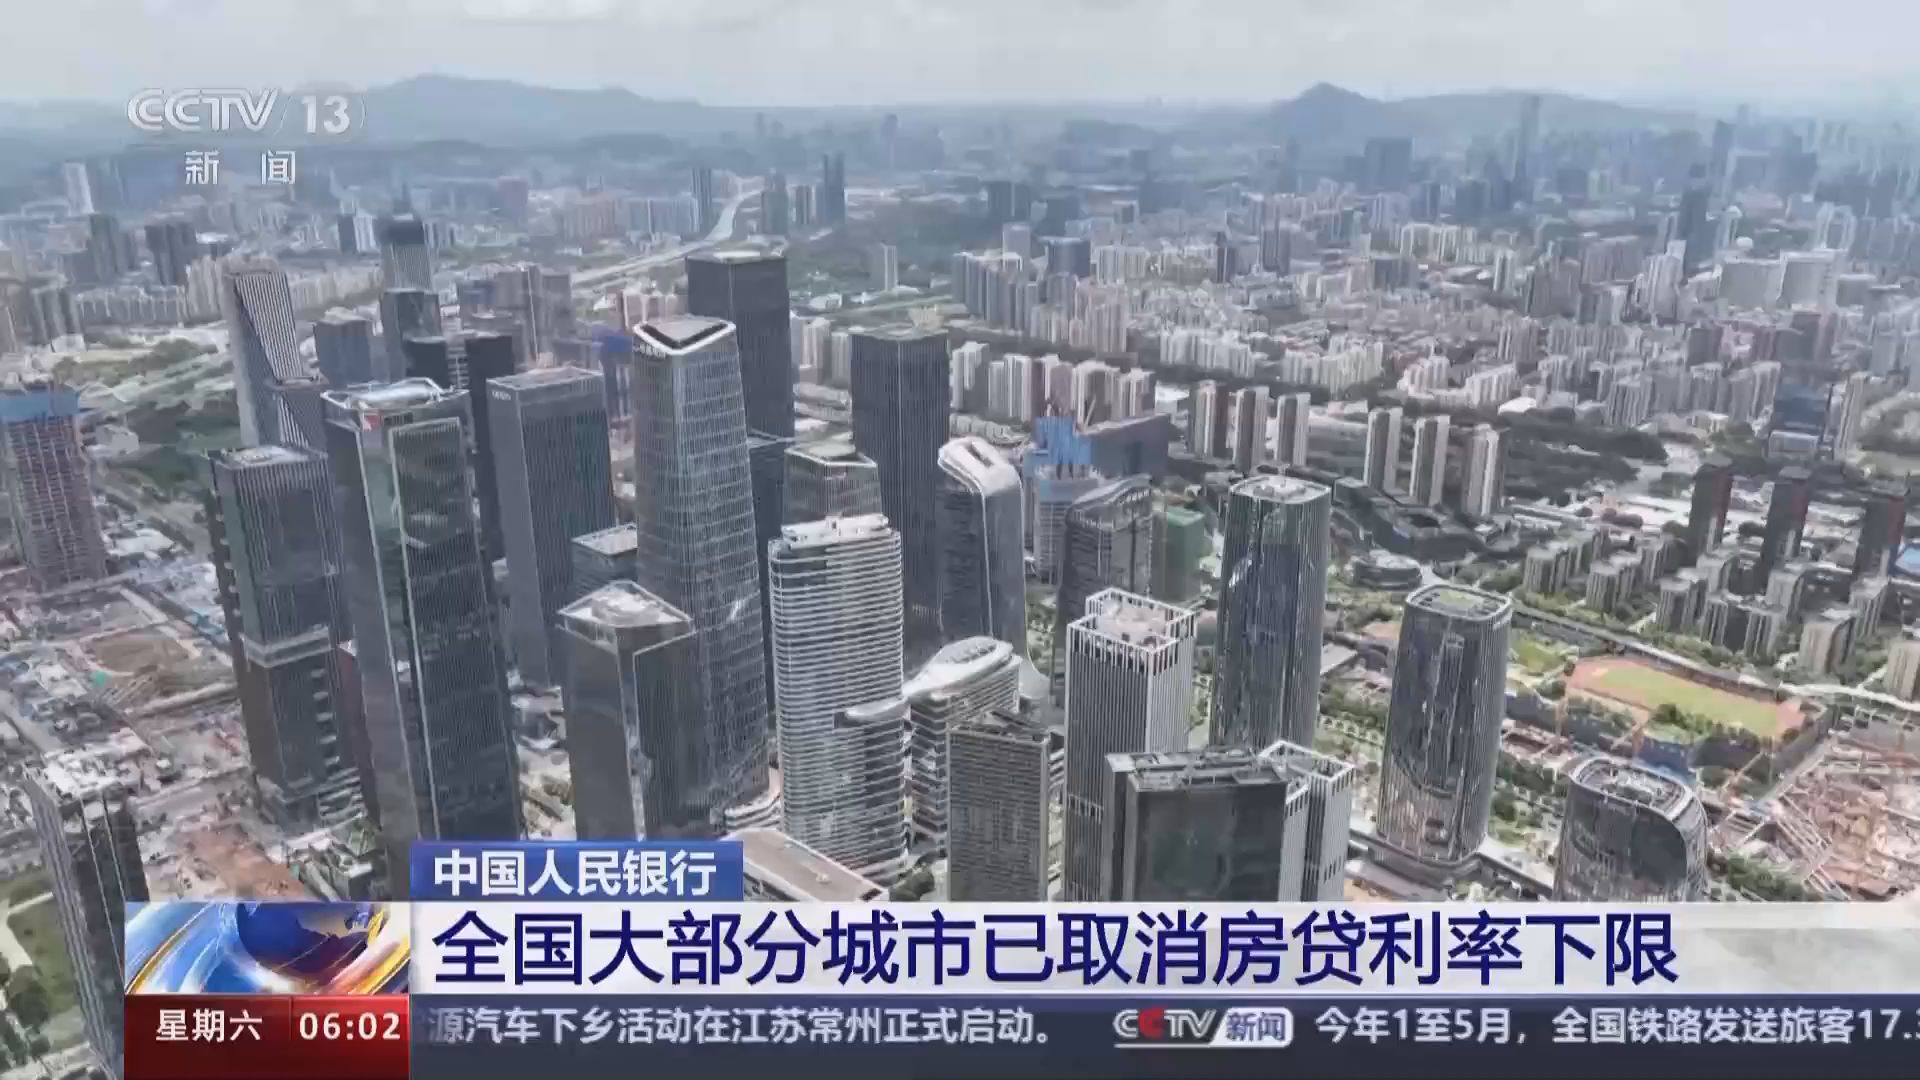  Central Bank: Most cities in China have cancelled the lower limit of housing loan interest rate